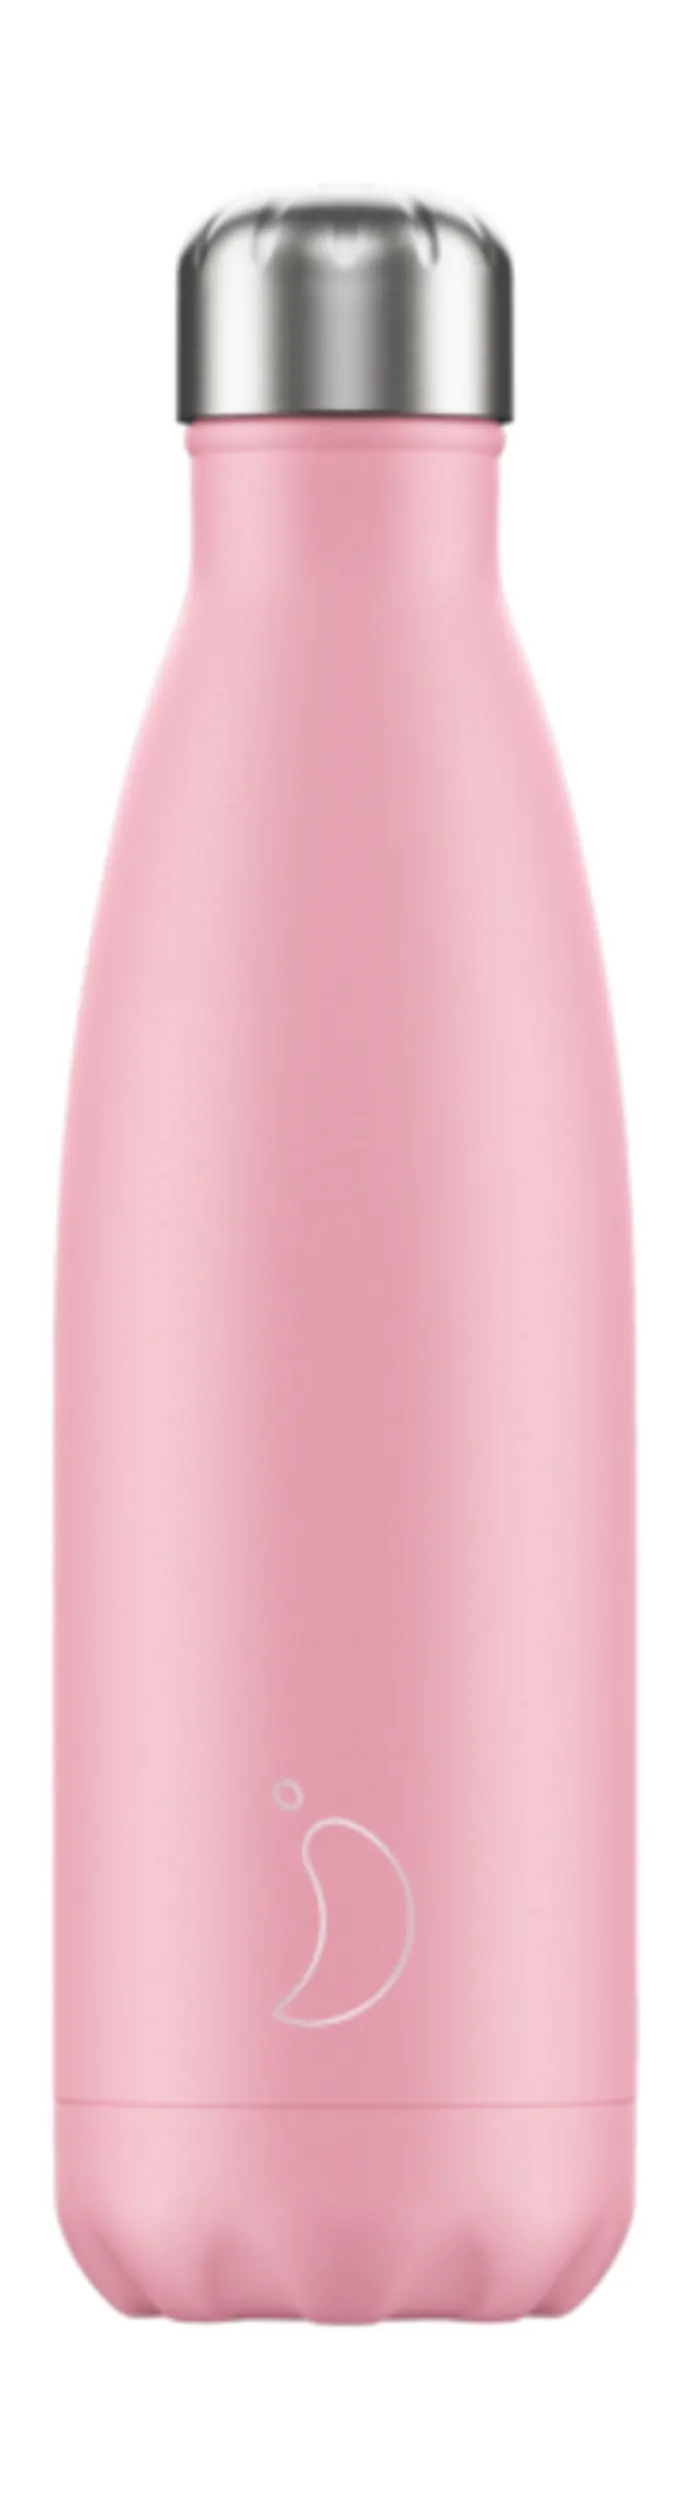 Chilly's 500ml Pink Stainless Steel Pastel Bottle